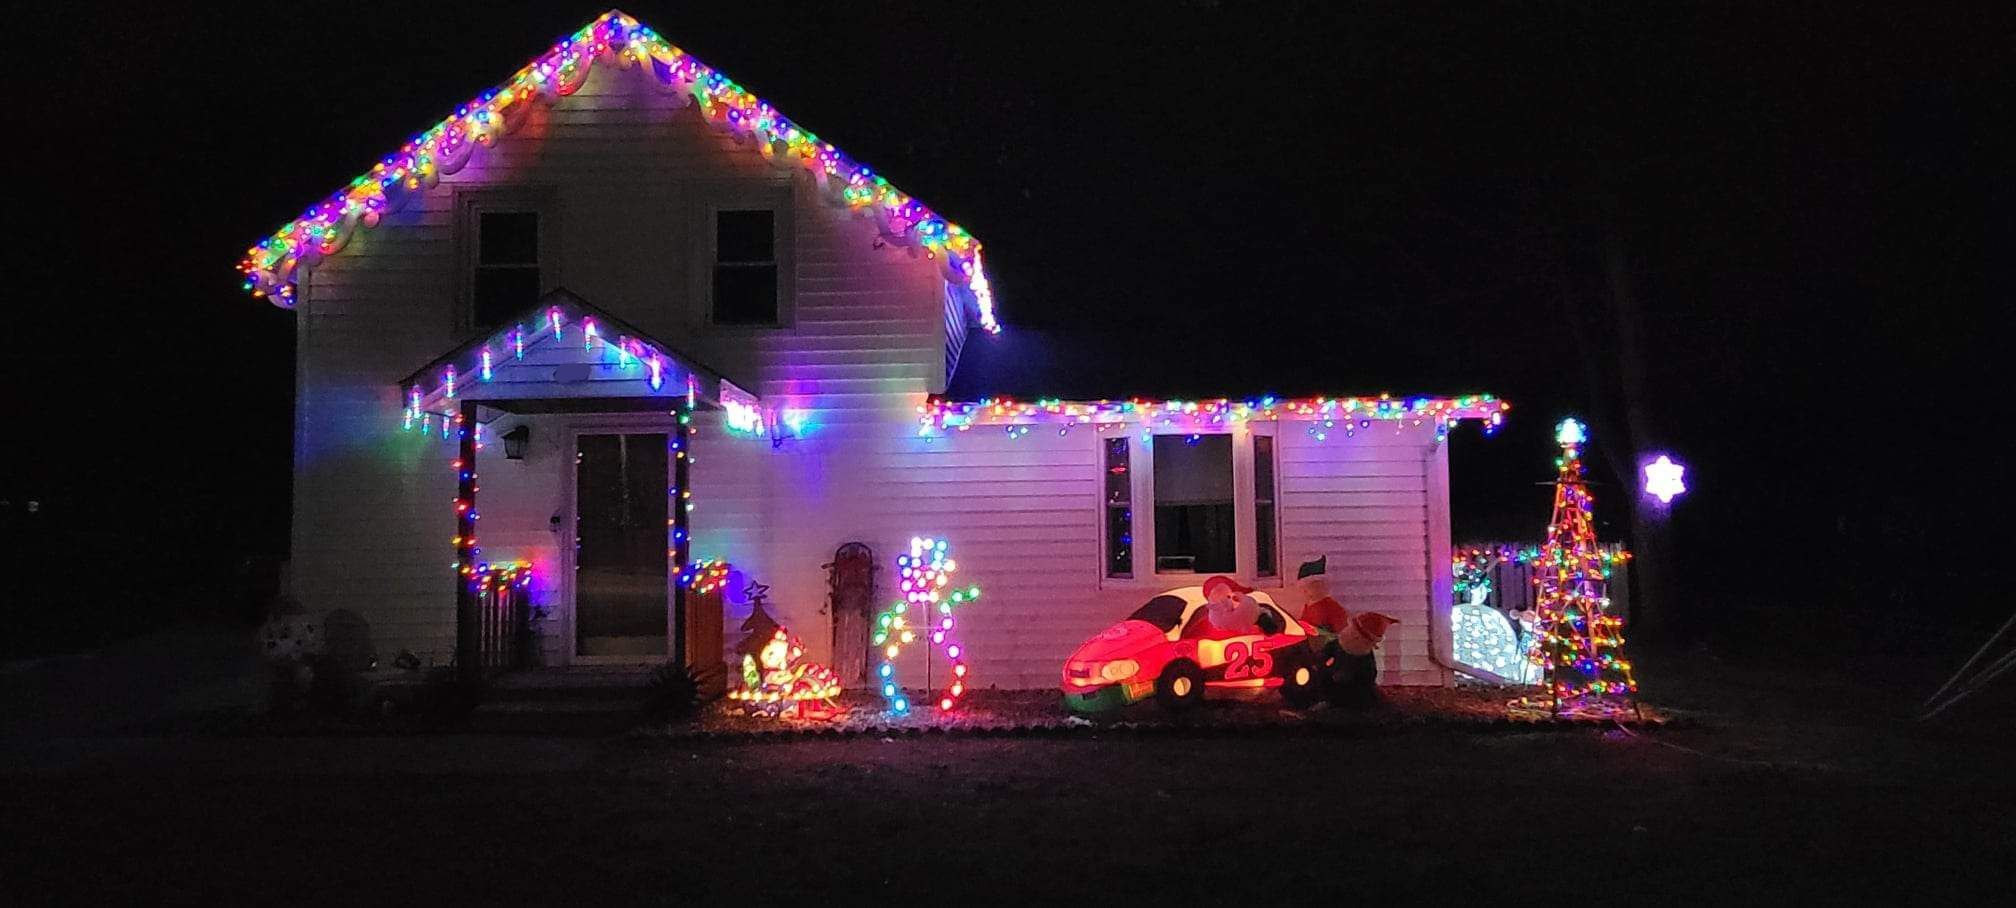 We love to decorate our house at Christmas time.